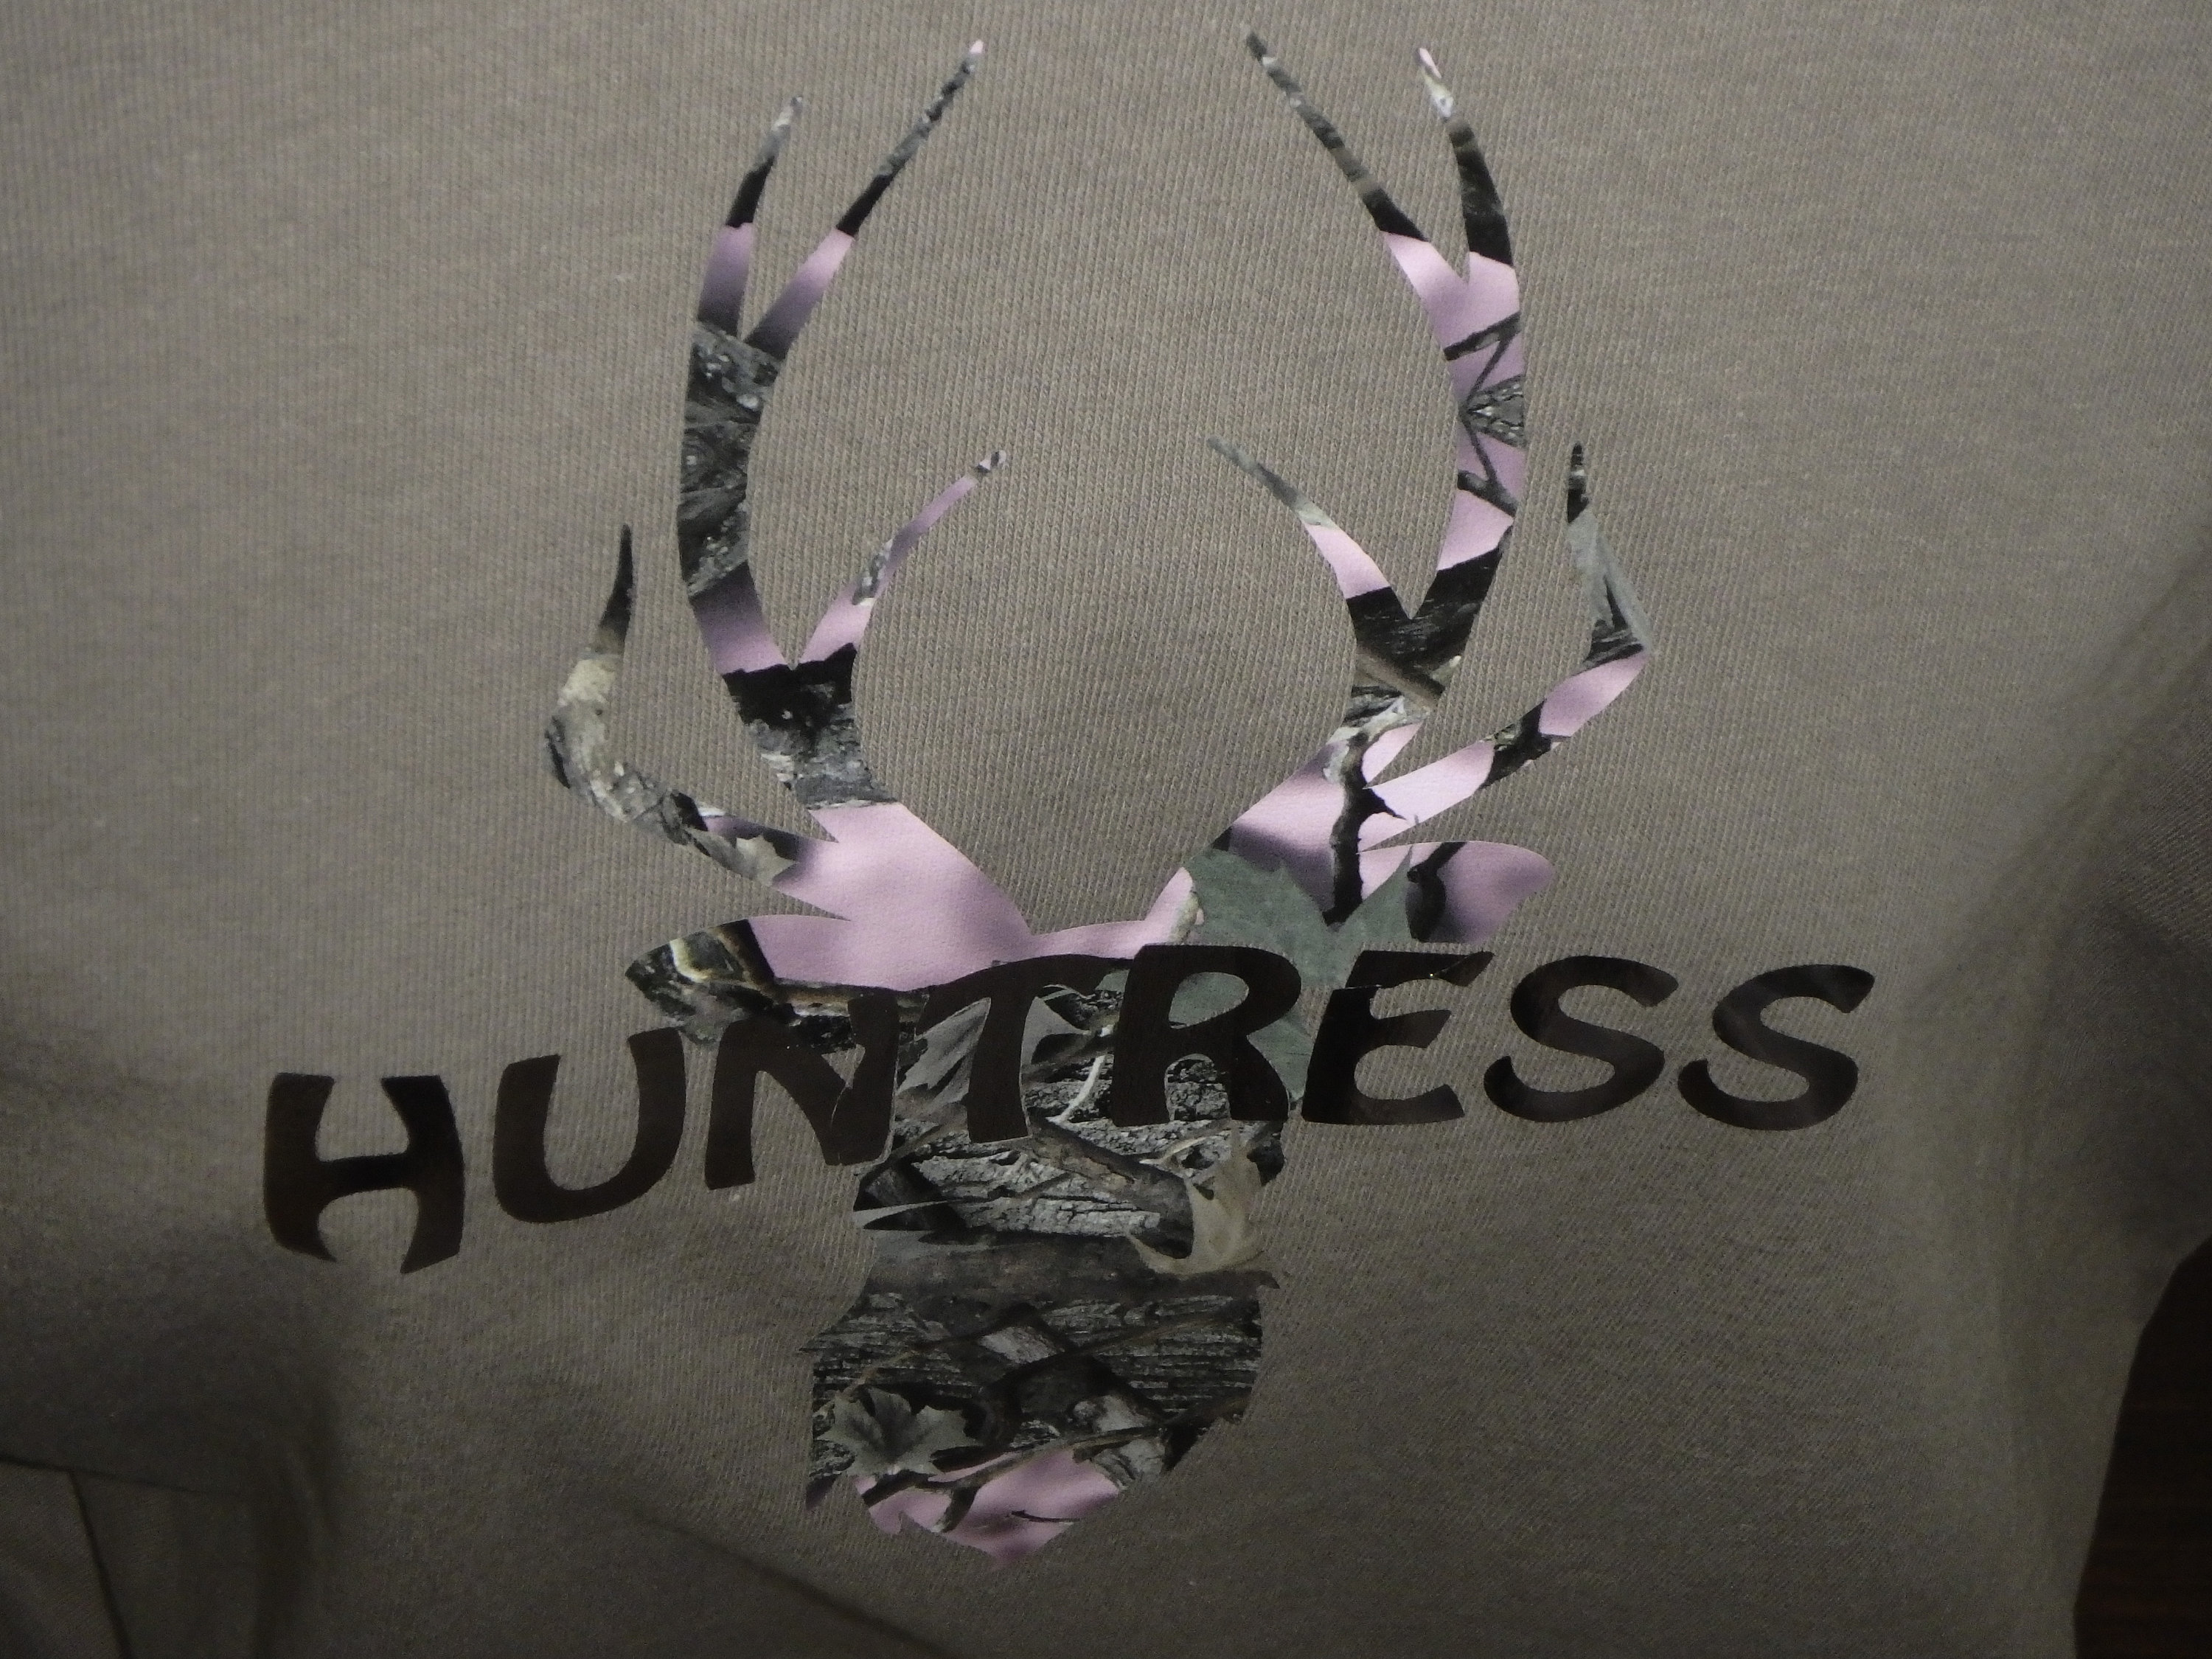 Huntress graphic tee for the female hunter camo and metallic | Etsy